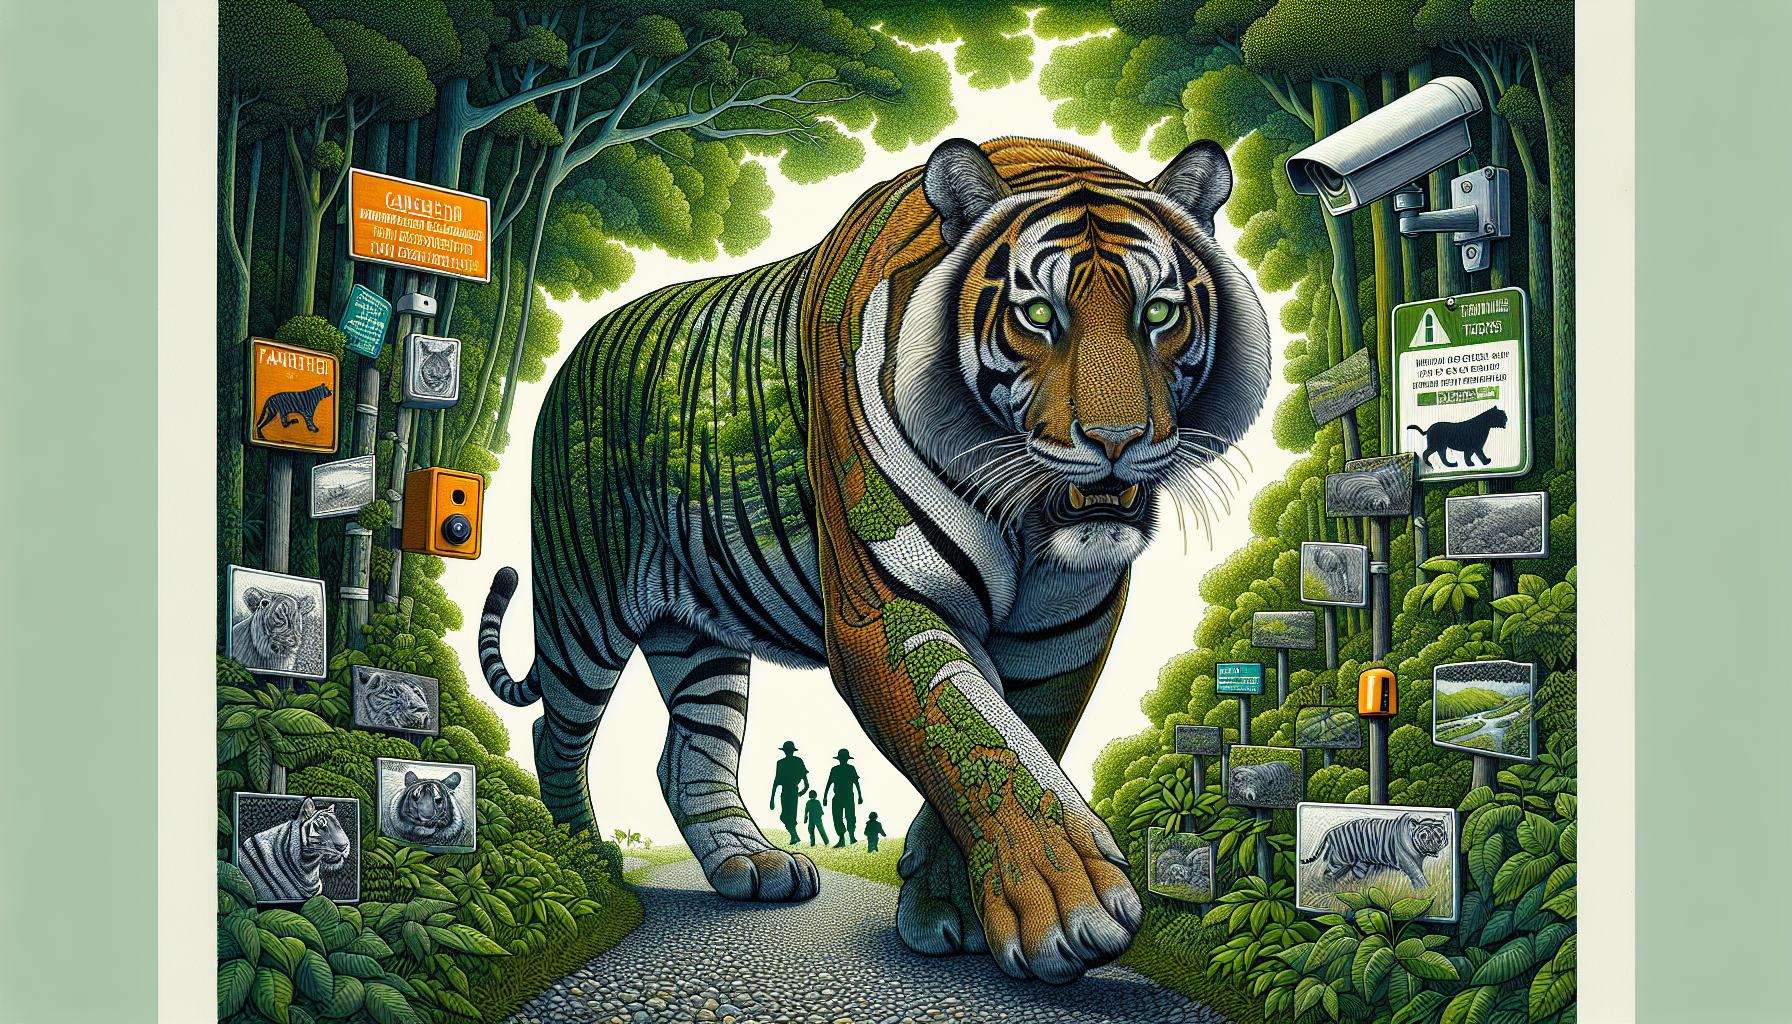 The majestic Bengal tiger: a fight for survival and conservation efforts